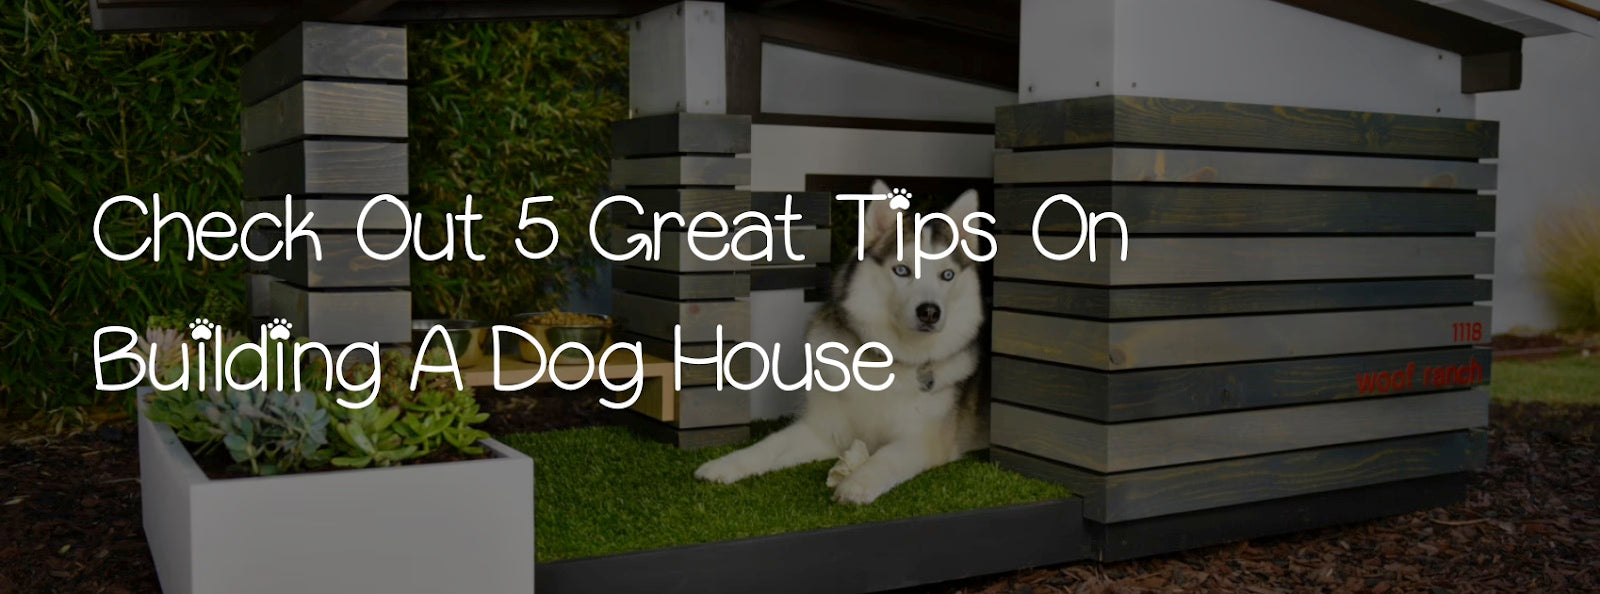 CHECK OUT 5 GREAT TIPS ON BUILDING A DOG HOUSE